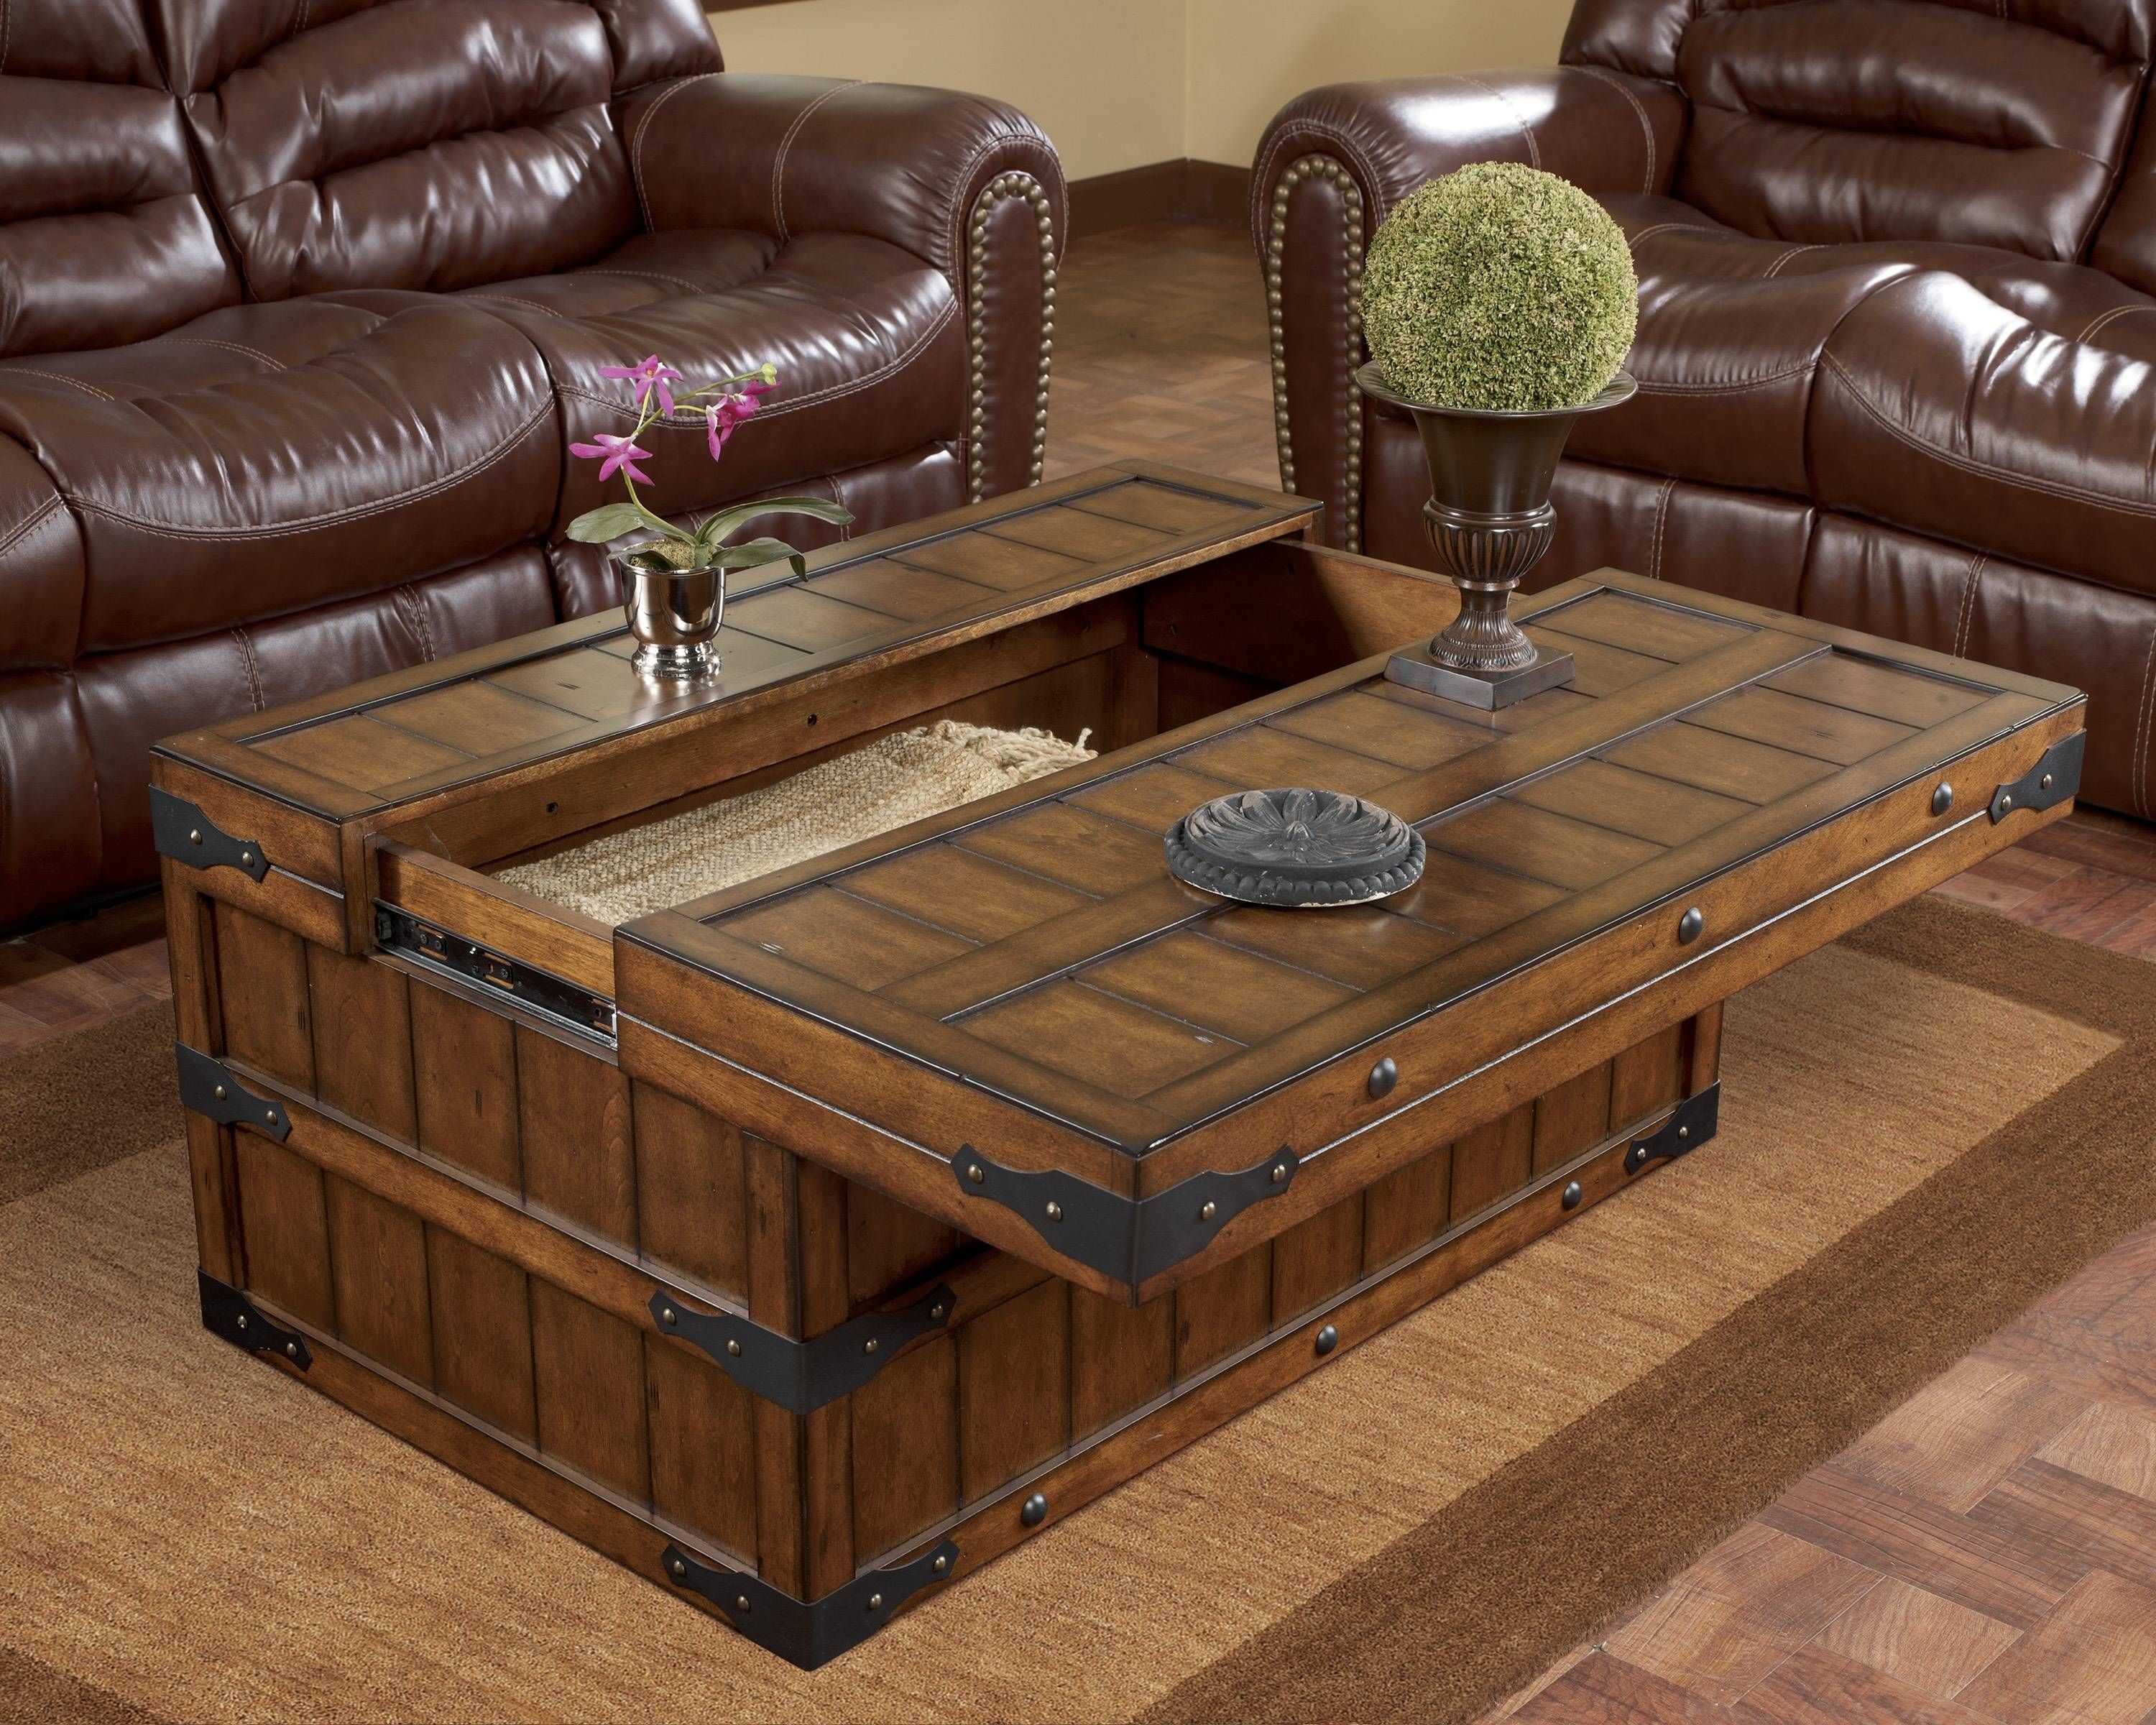 12 The Best Large Coffee Table with Storage